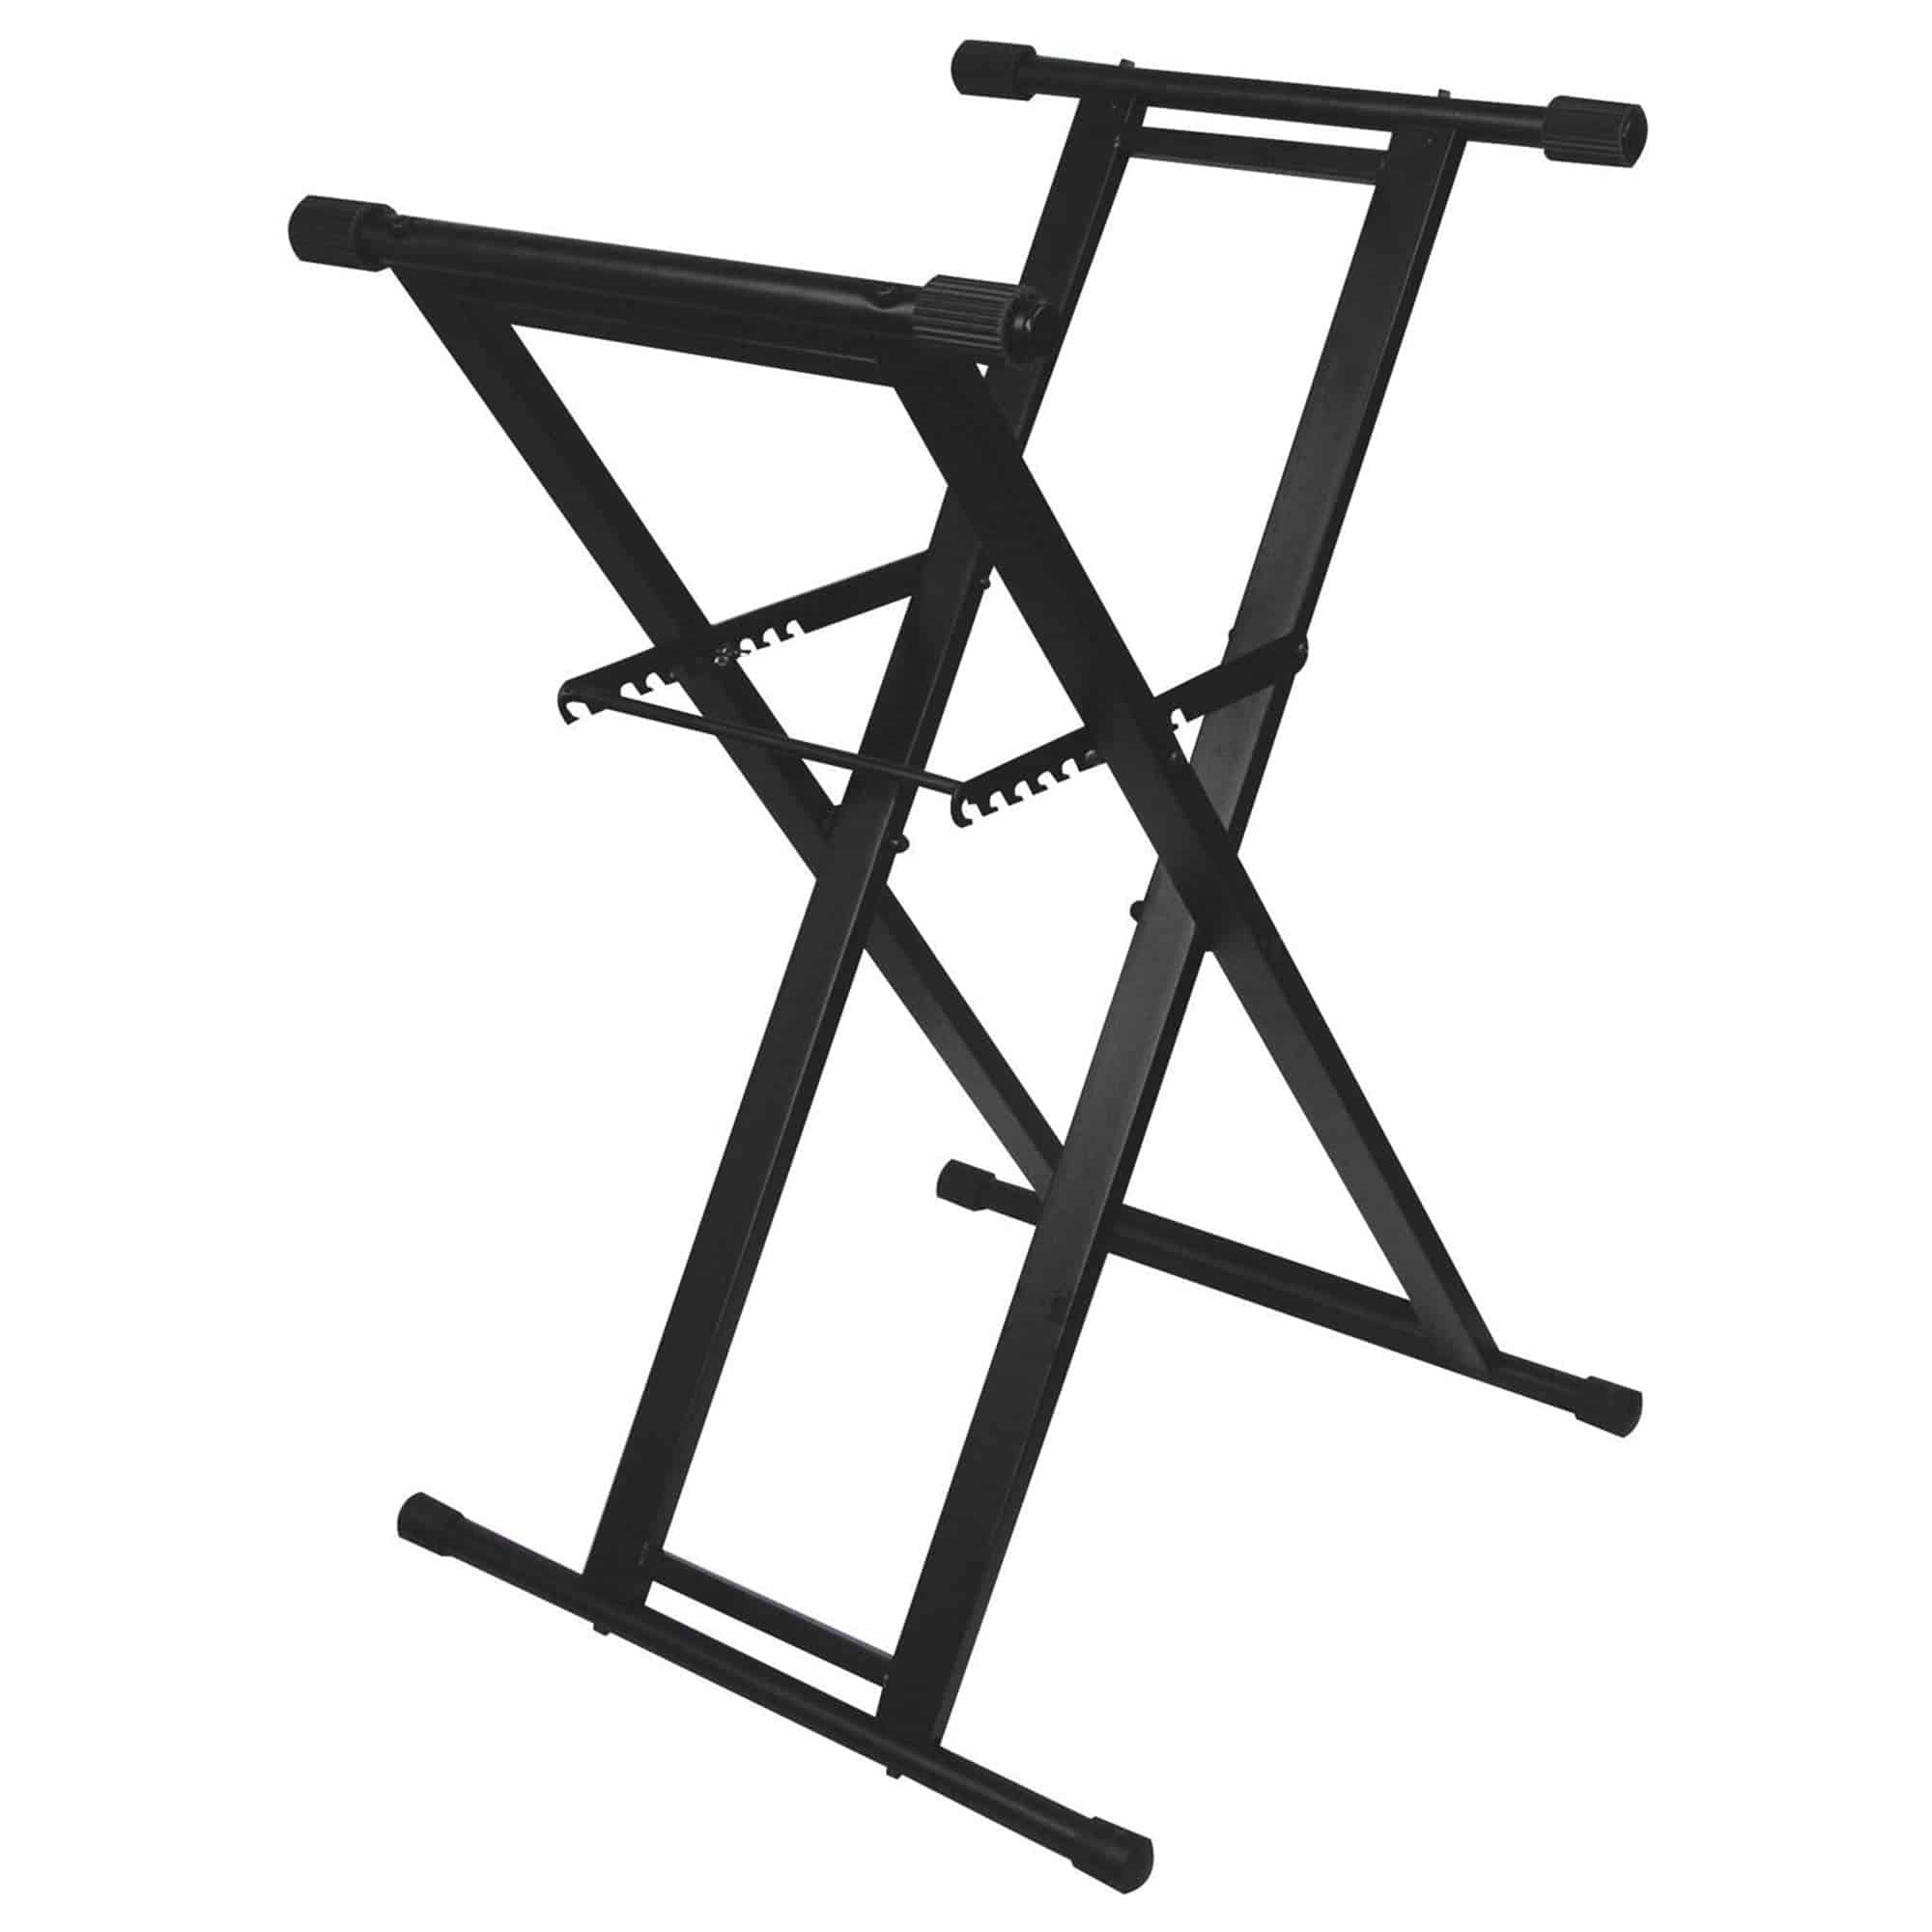 Odyssey LTBXS, Heavy-Duty X-Stand for DJ Coffins and Controller Cases - Black - Hollywood DJ